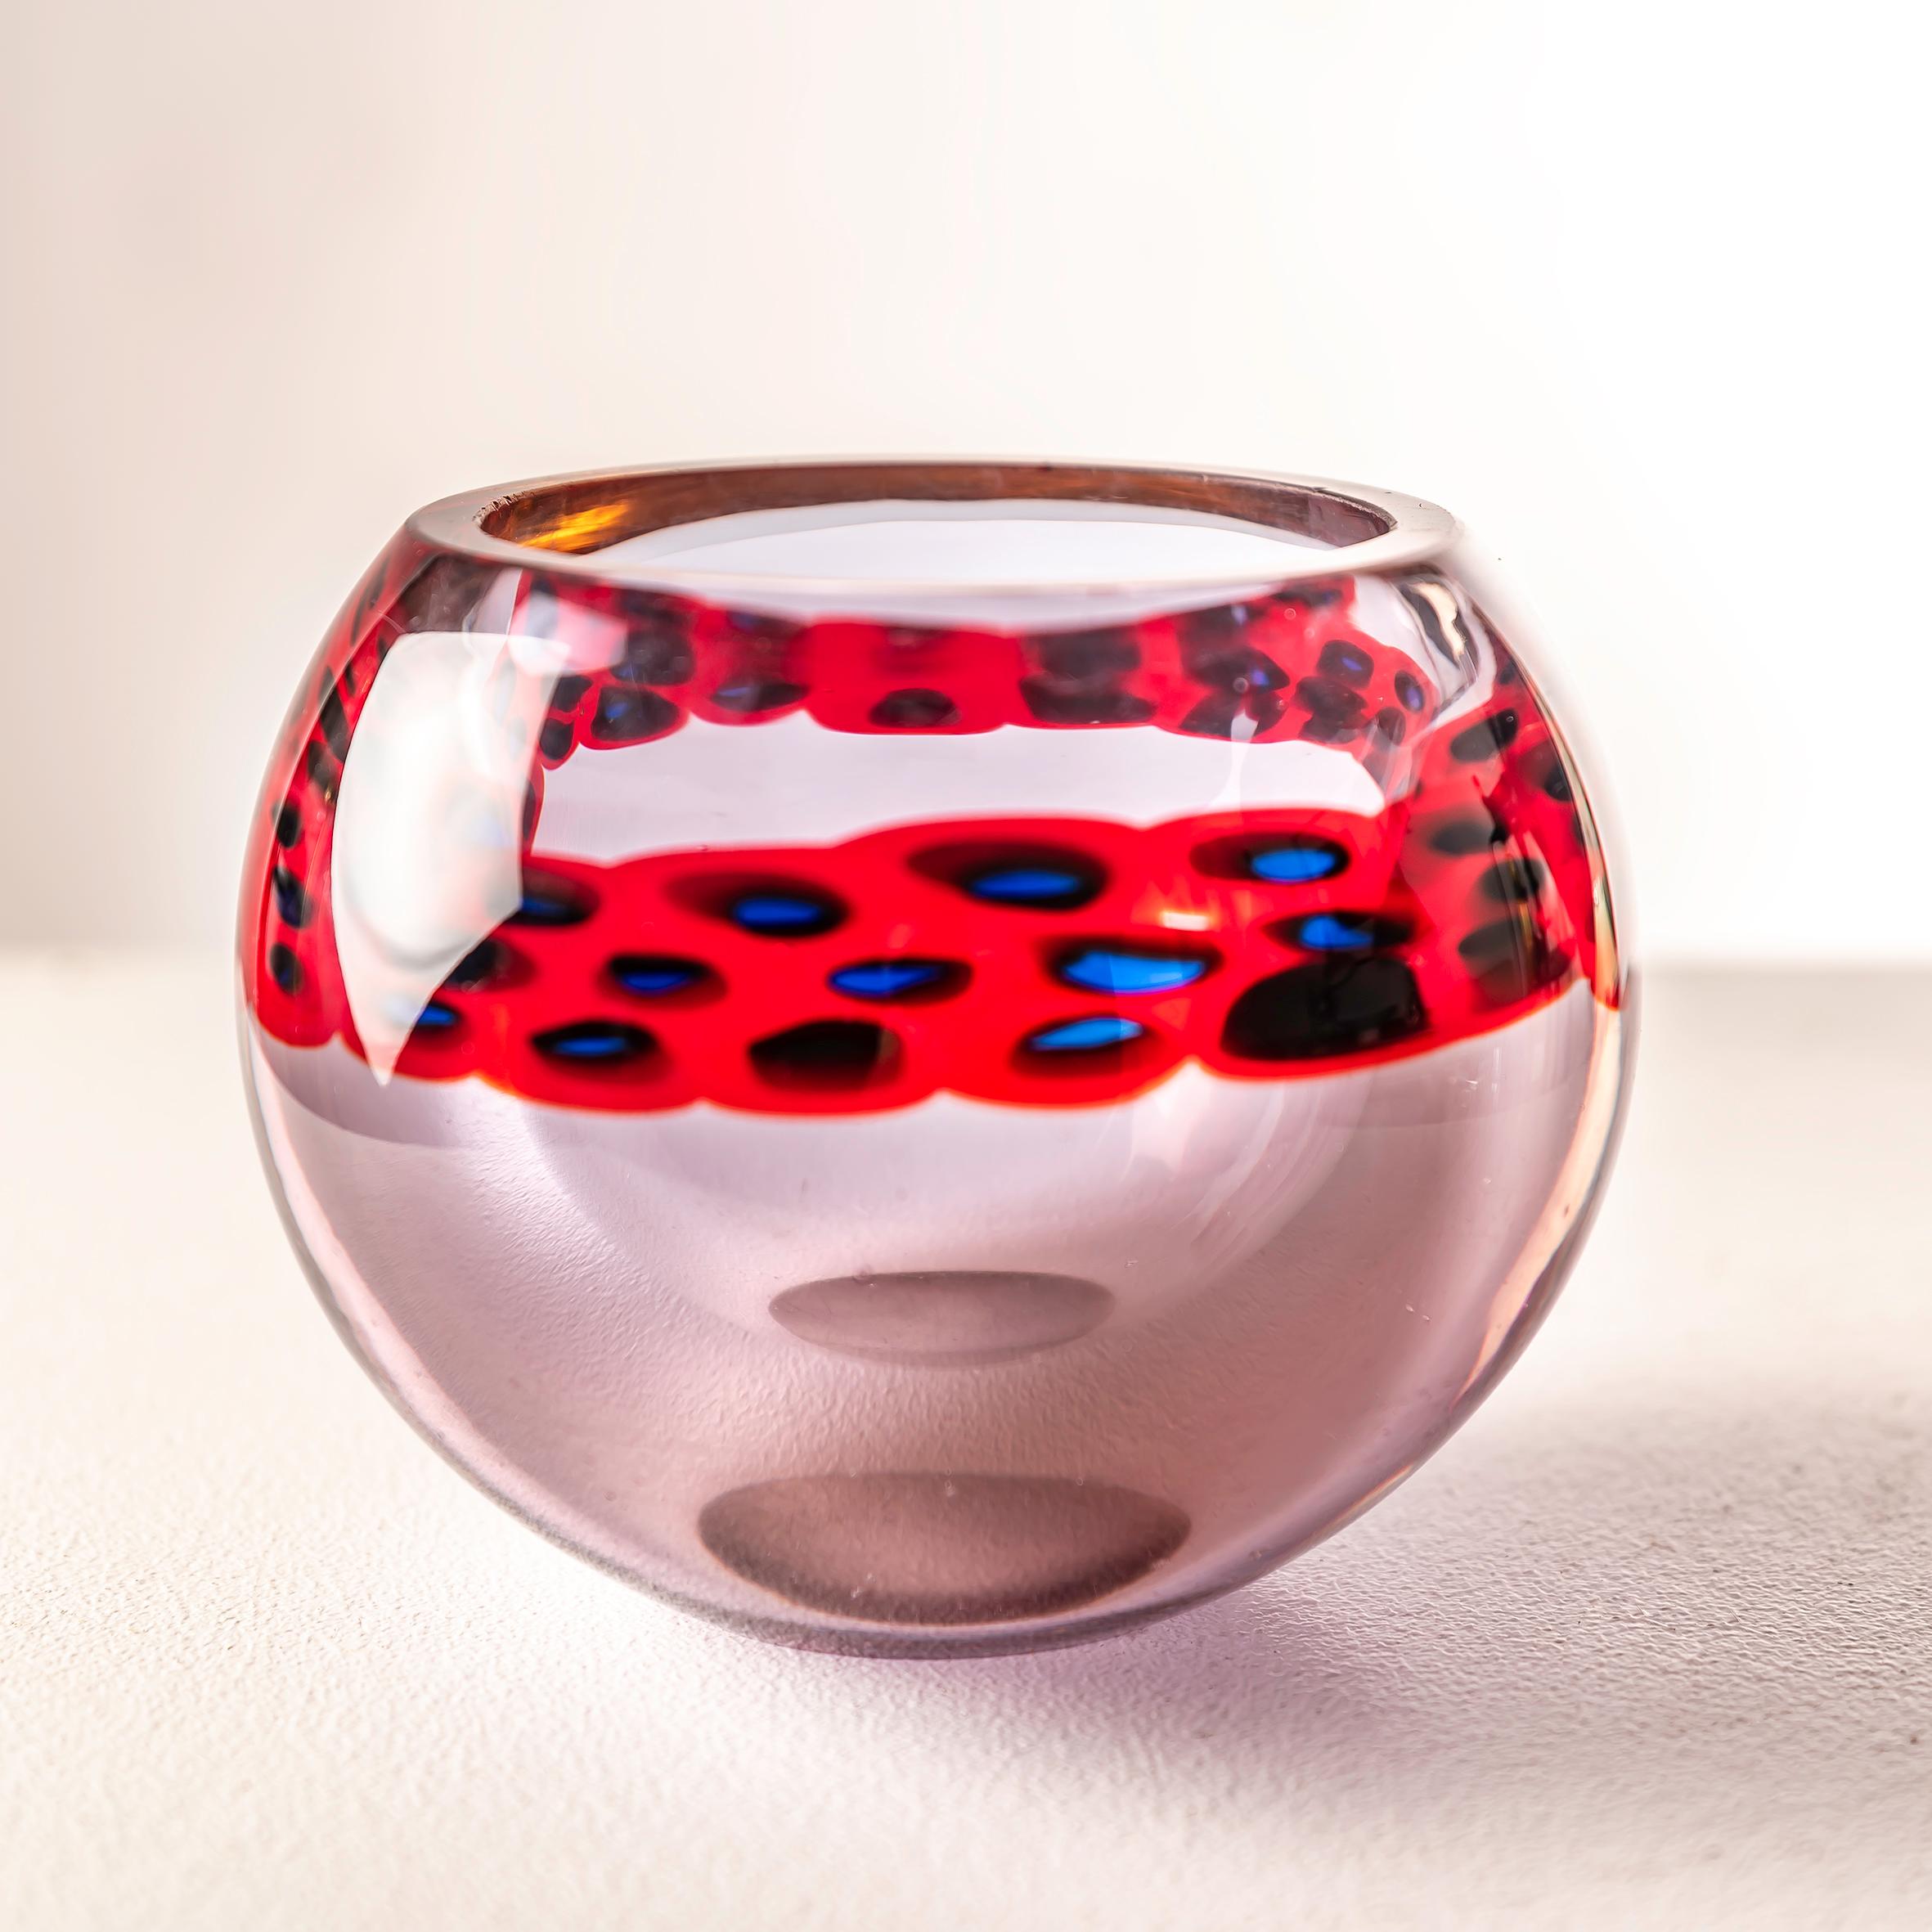 The Murrine glass vase by Antonio Da Ros for Cenedese, Italy, circa the 1960s, intertwines vibrant red and calming blue hues in a dance of glass mastery. Da Ros's finesse amplifies the Murrine technique's allure, each intricate pattern a testament